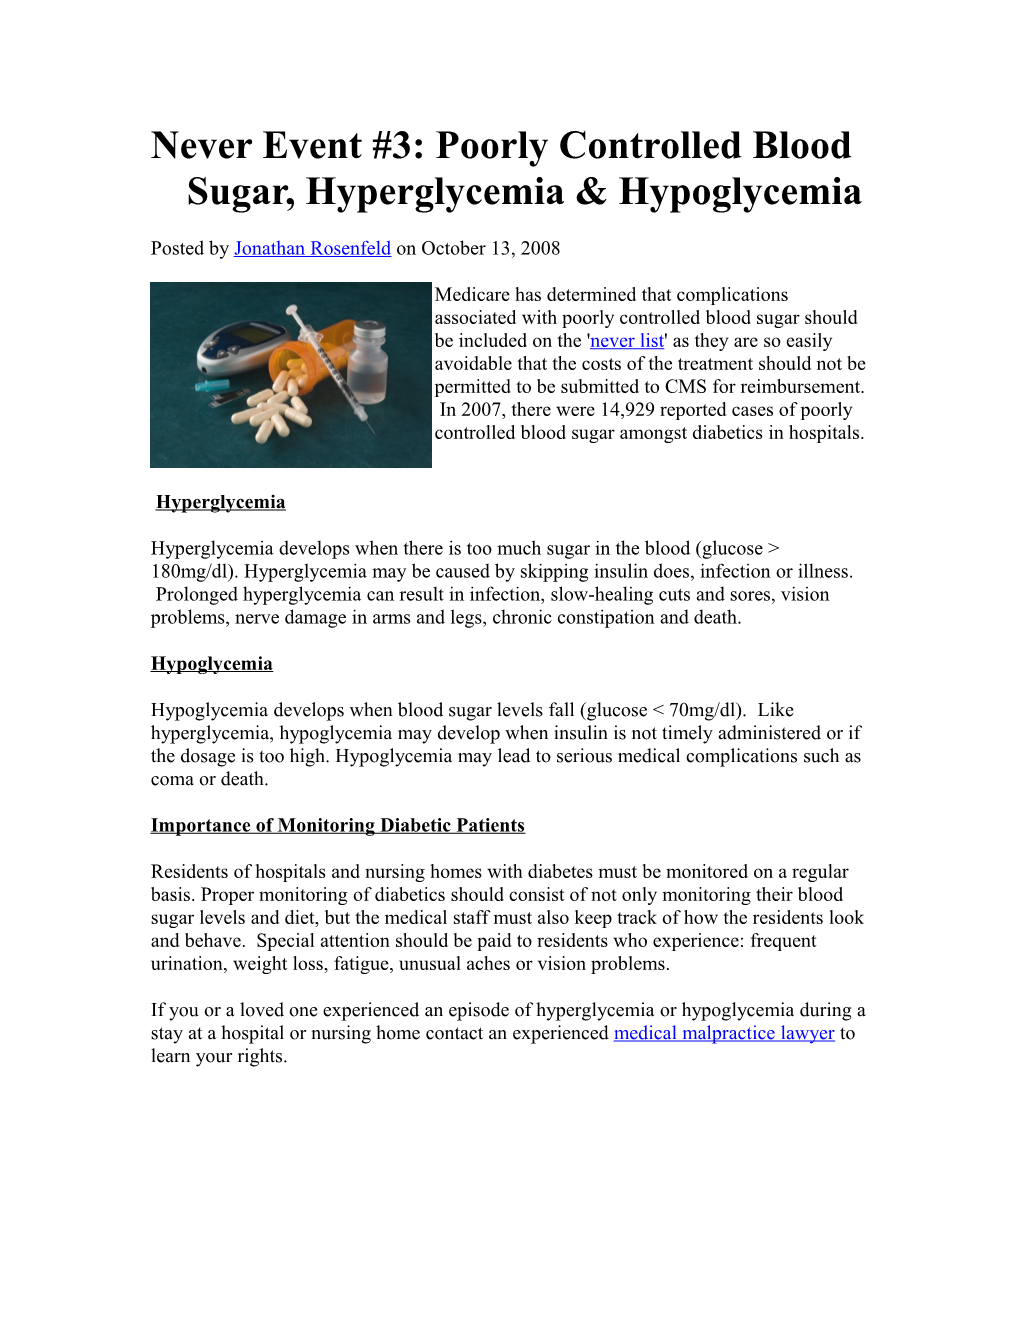 Never Event #3: Poorly Controlled Blood Sugar, Hyperglycemia & Hypoglycemia